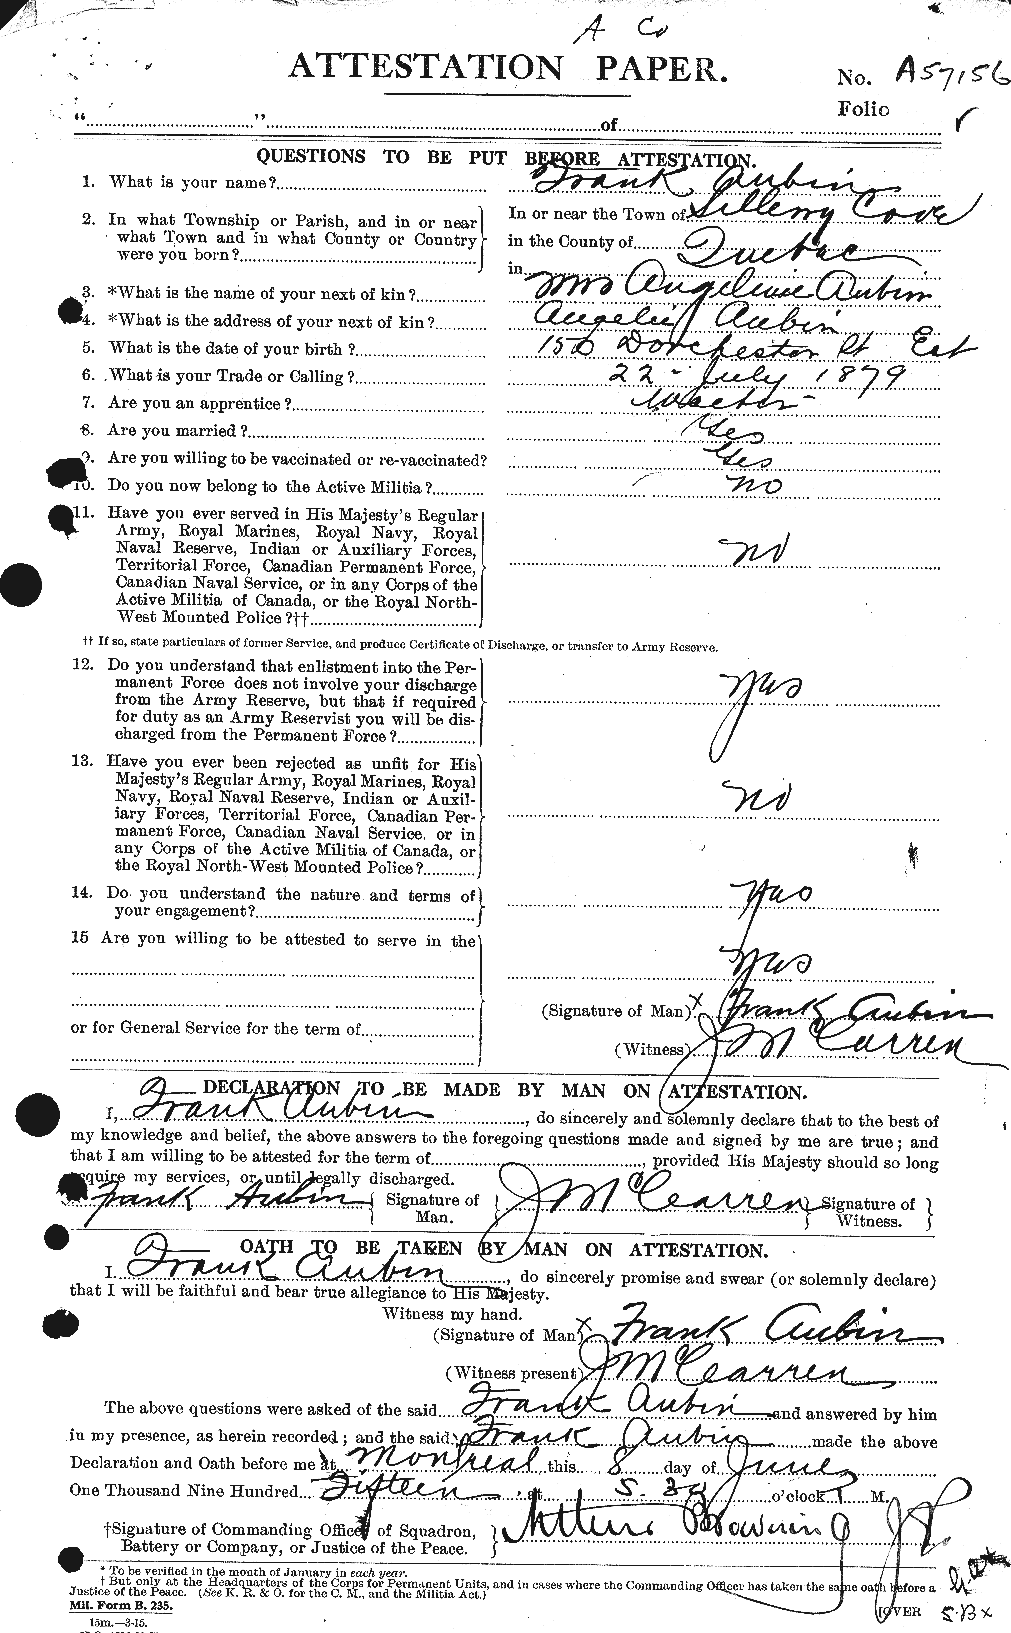 Personnel Records of the First World War - CEF 223871a